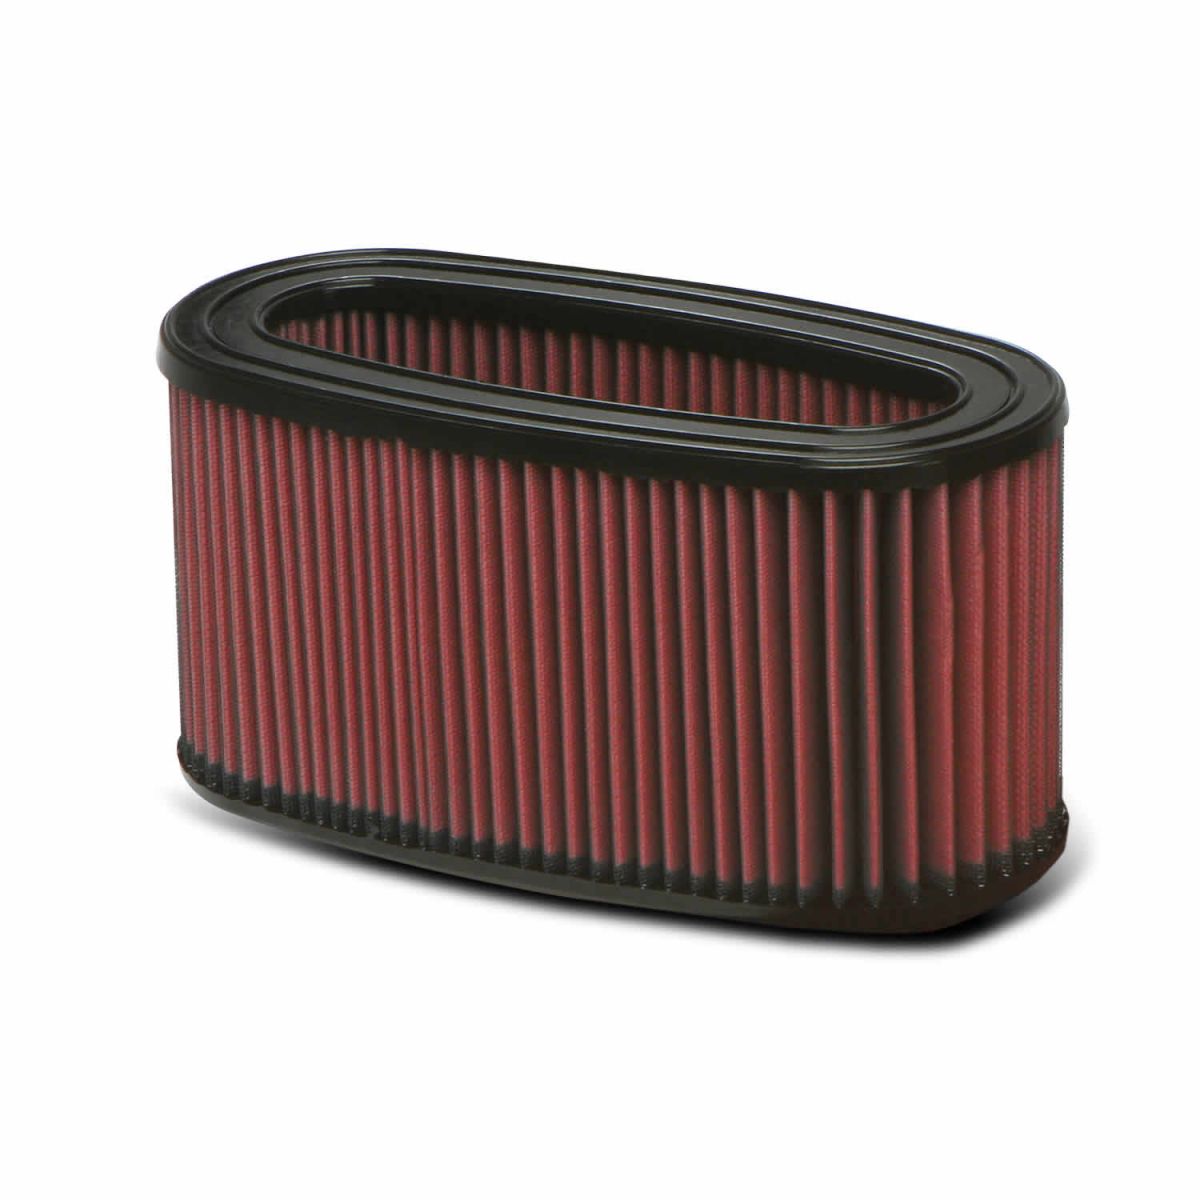 Banks Power - Banks Power Air Filter Element Oiled For Use W/Ram-Air Cold-Air Intake Systems 94-97 Ford 7.3L